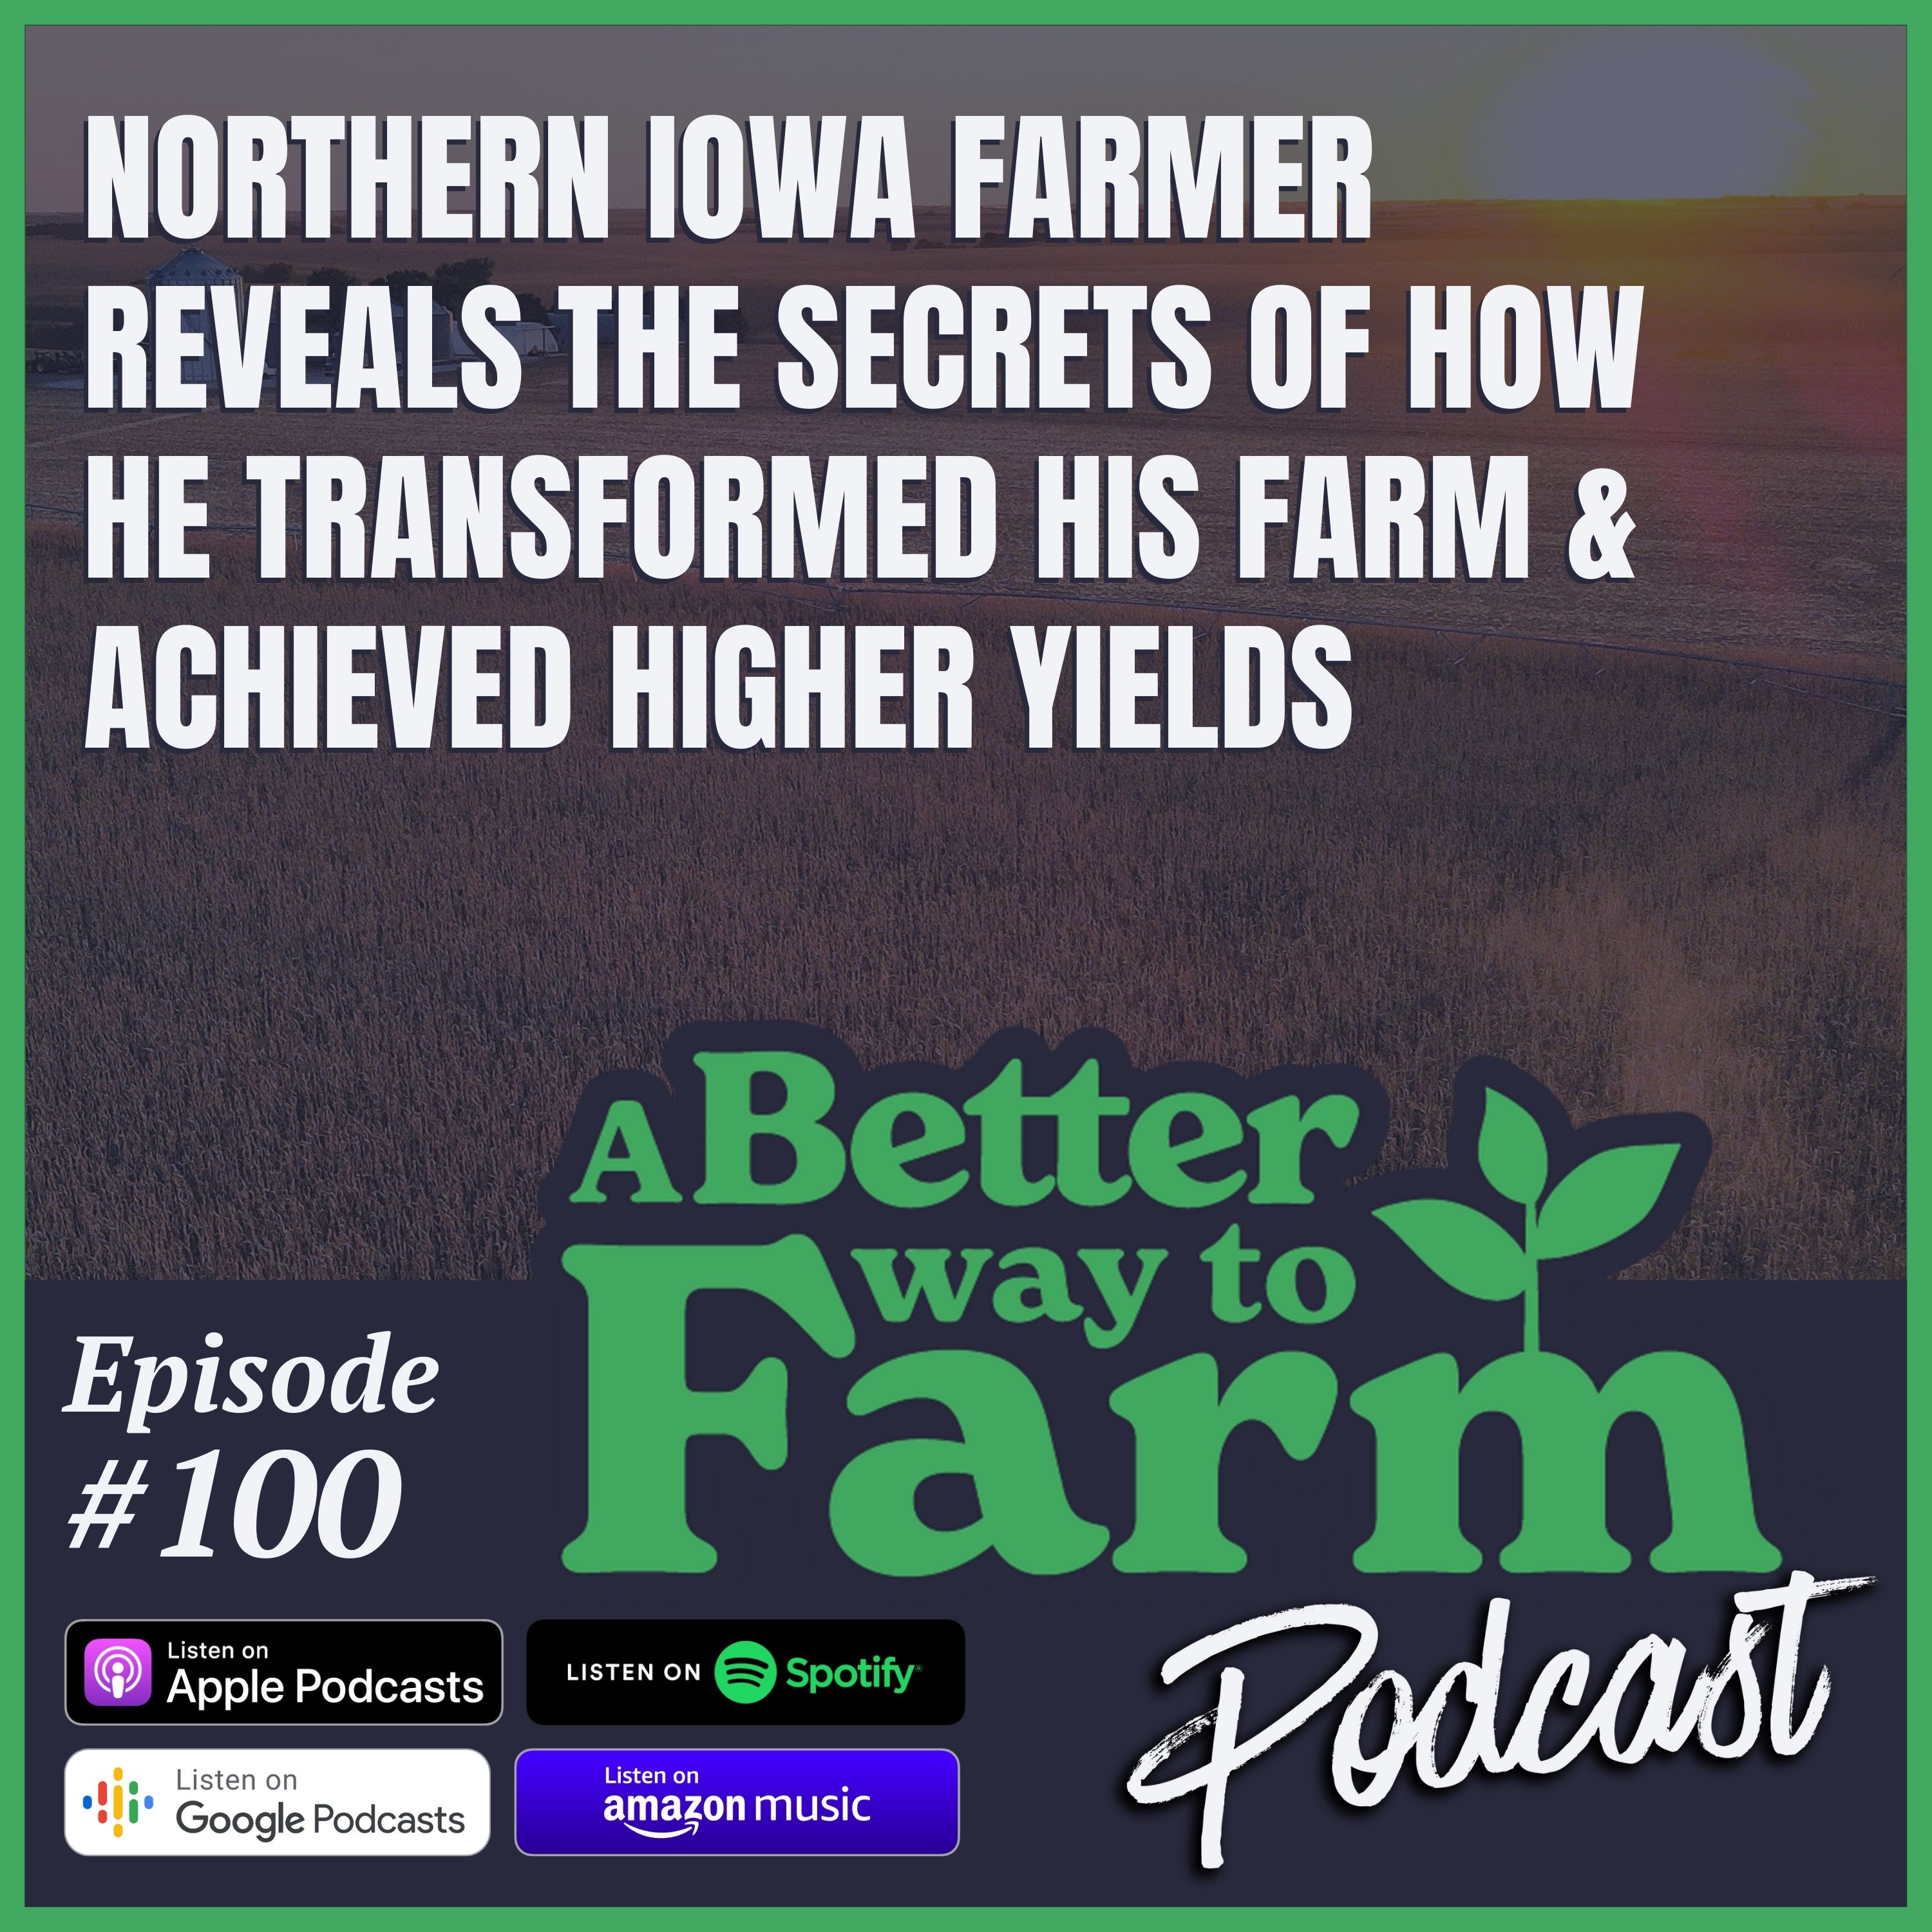 Northern Iowa Farmer Reveals The Secrets of How He Transformed His Farm & Achieved Higher Yields Ep100